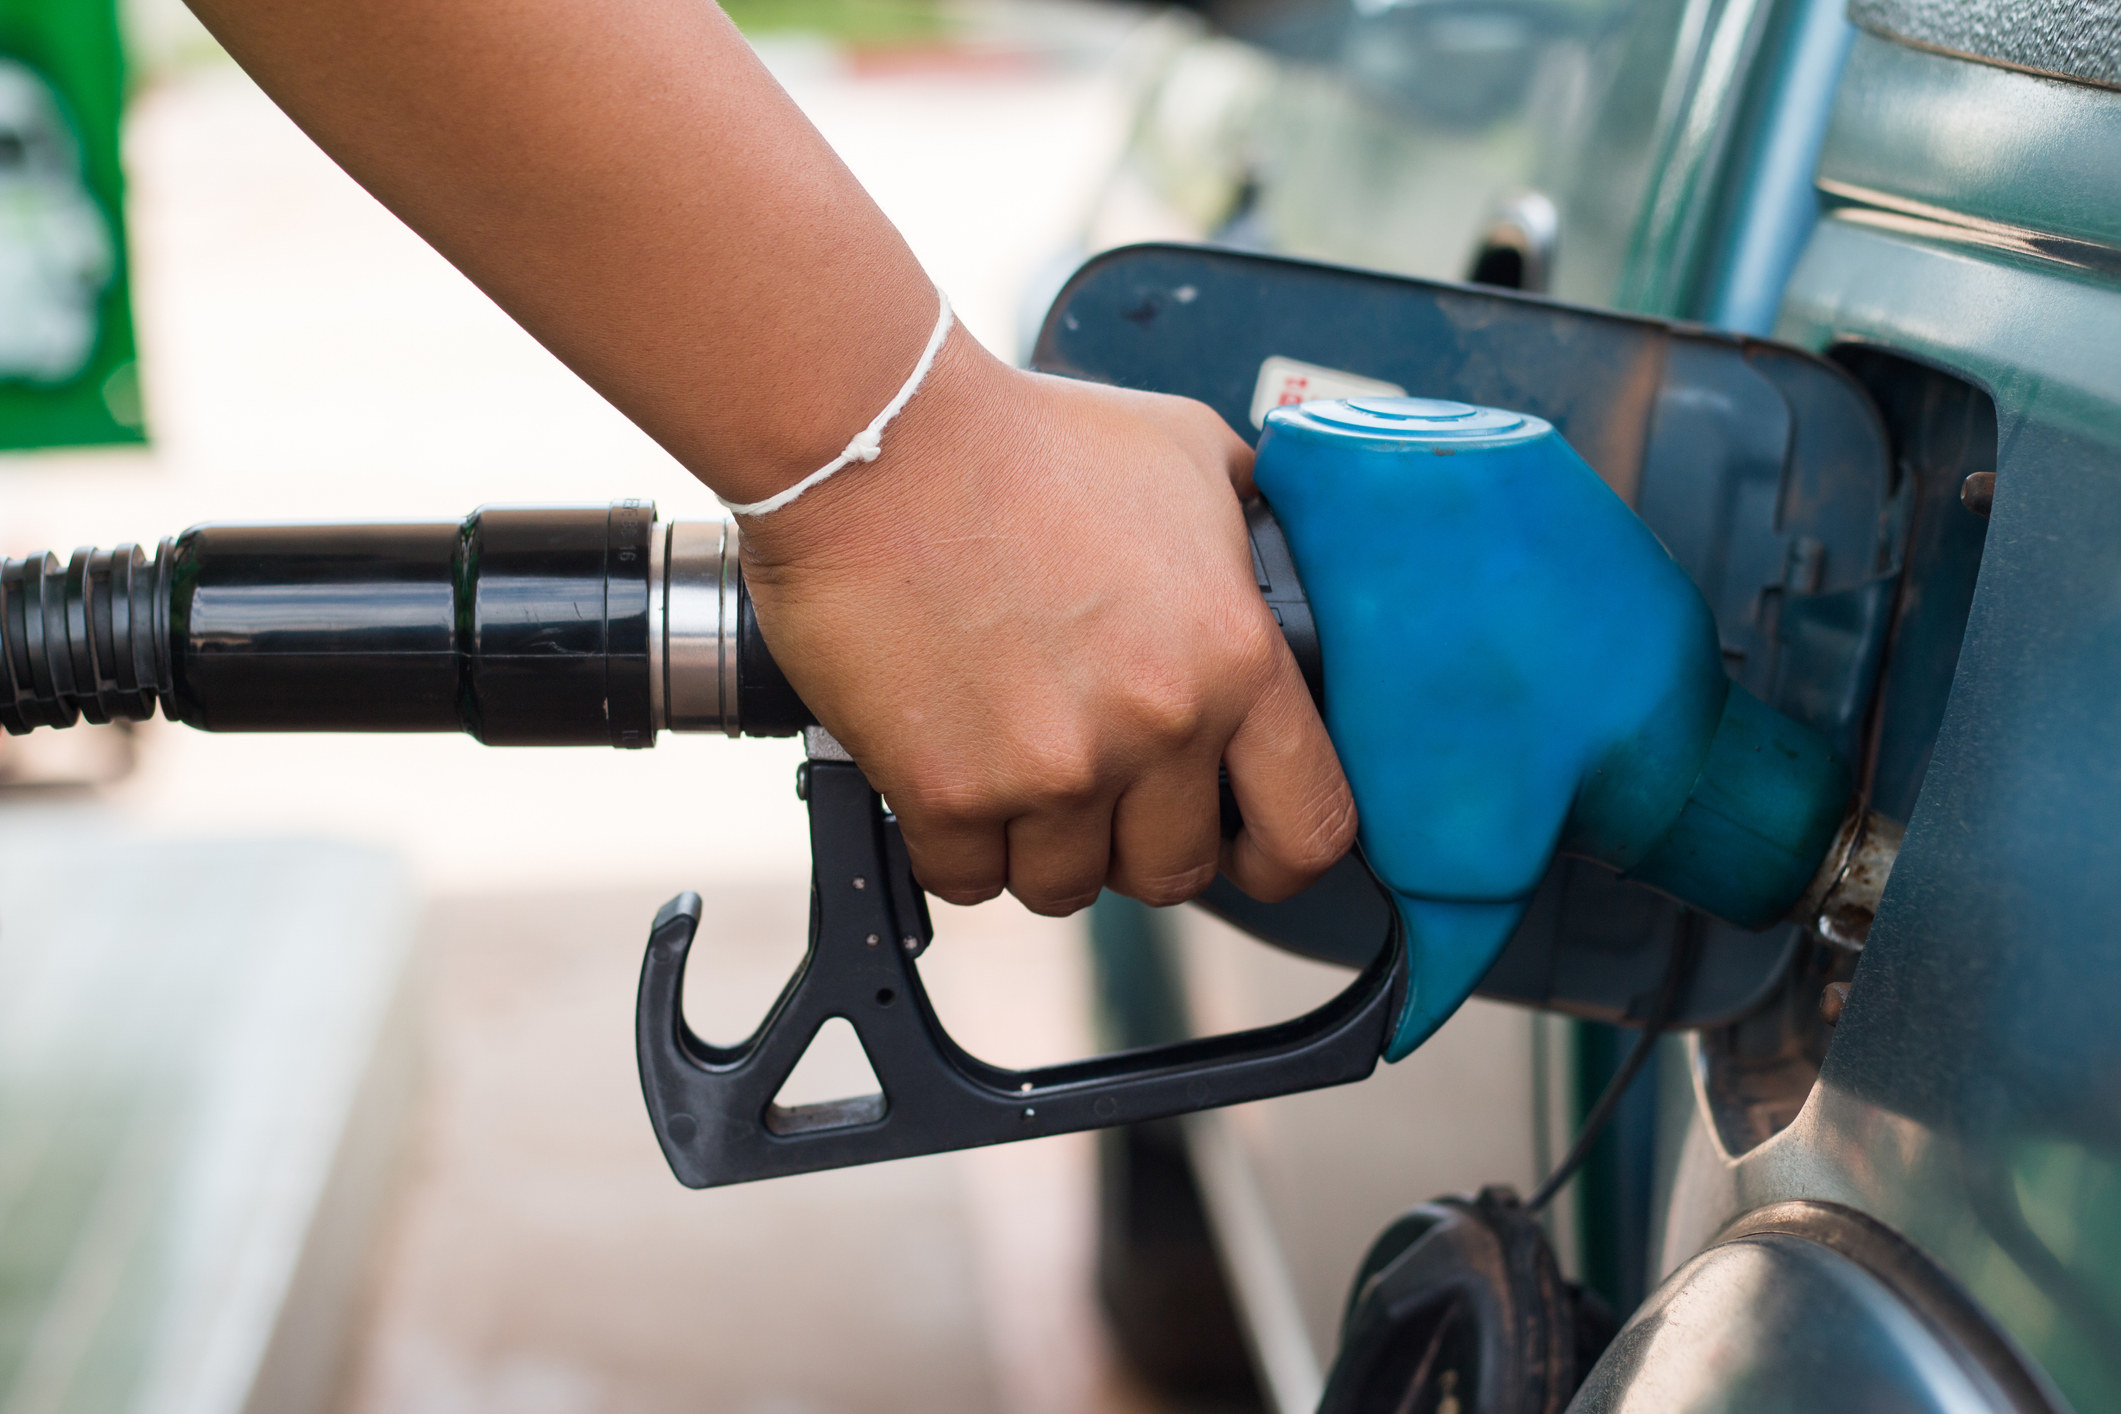 A person fills up their gas tank at a station.